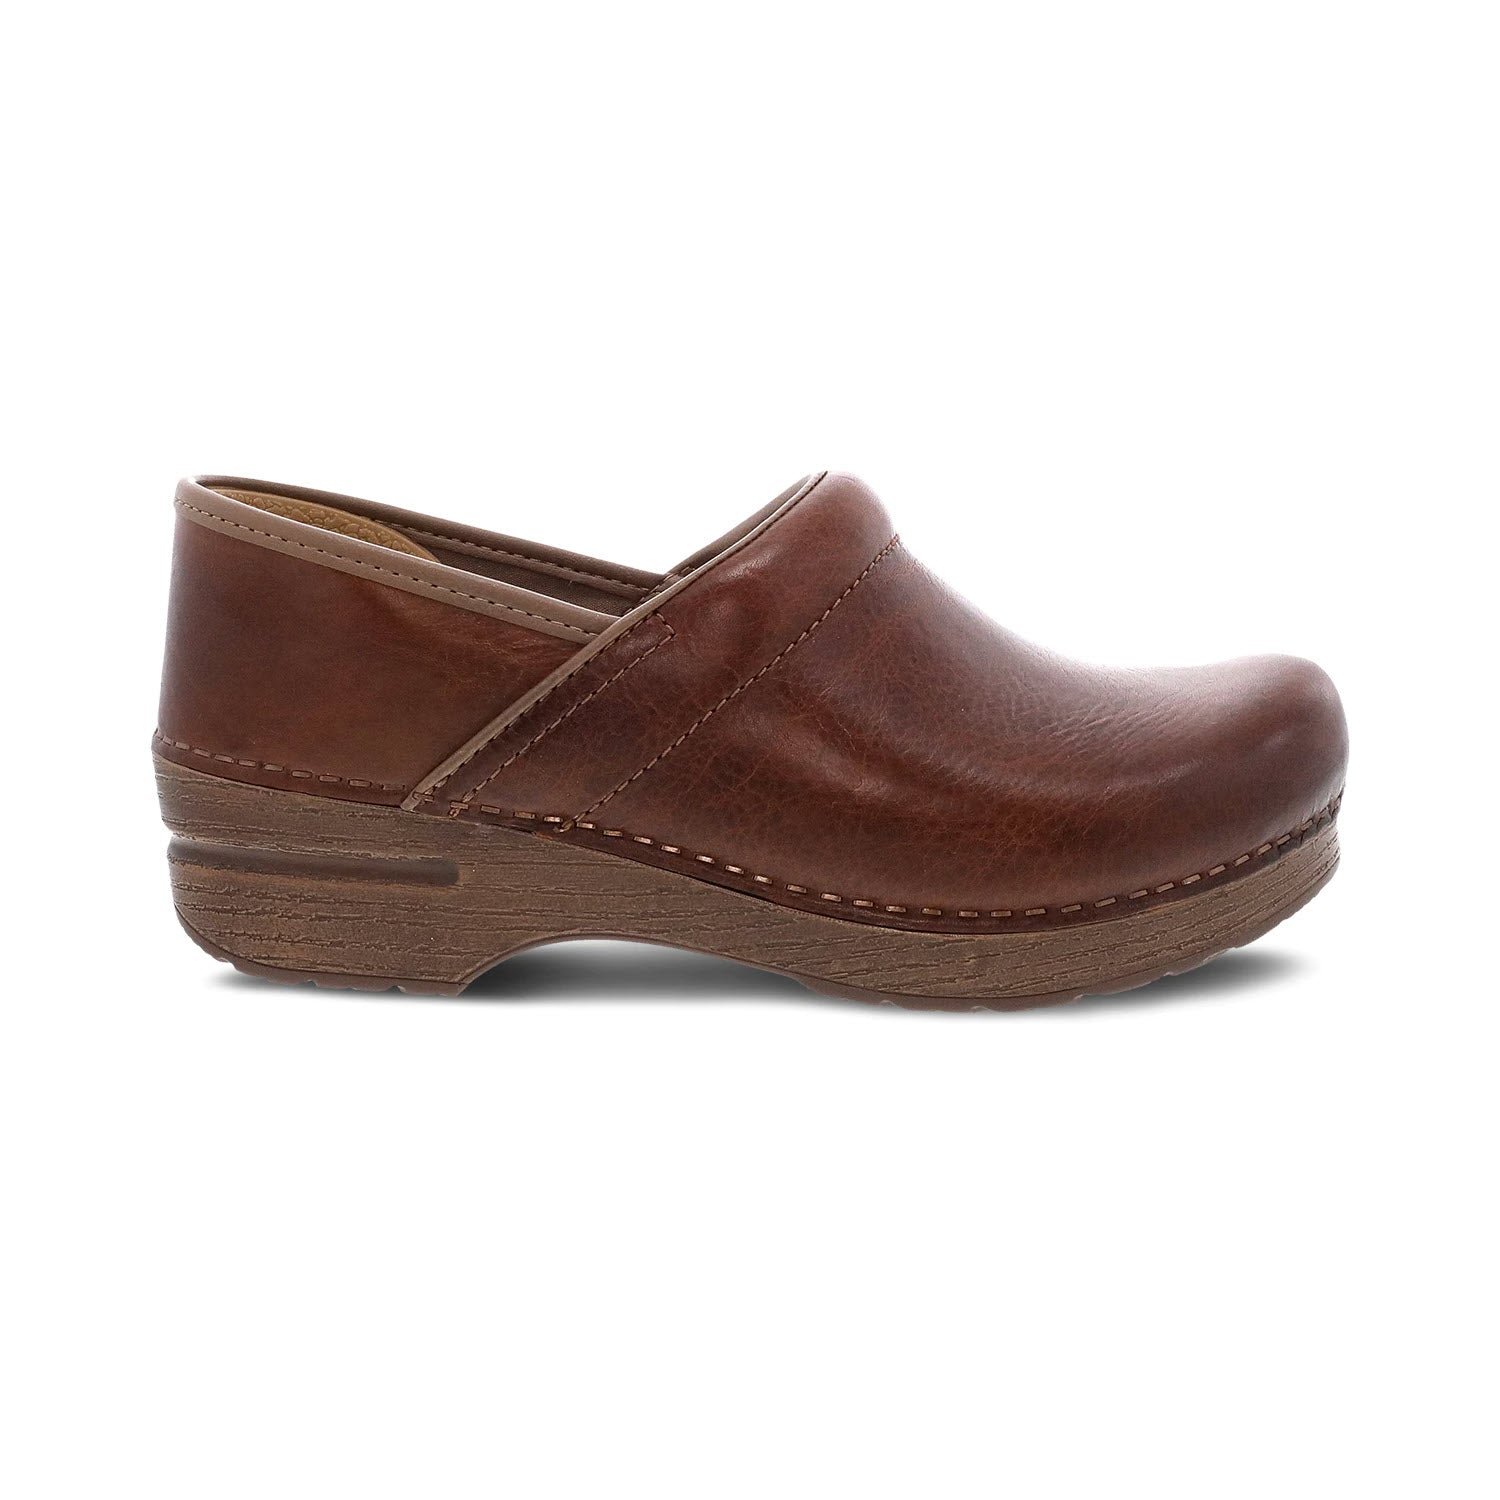 A brown leather Dansko Prof Saddle Full Grain clog on a white background, featuring a rounded toe and wooden heel.